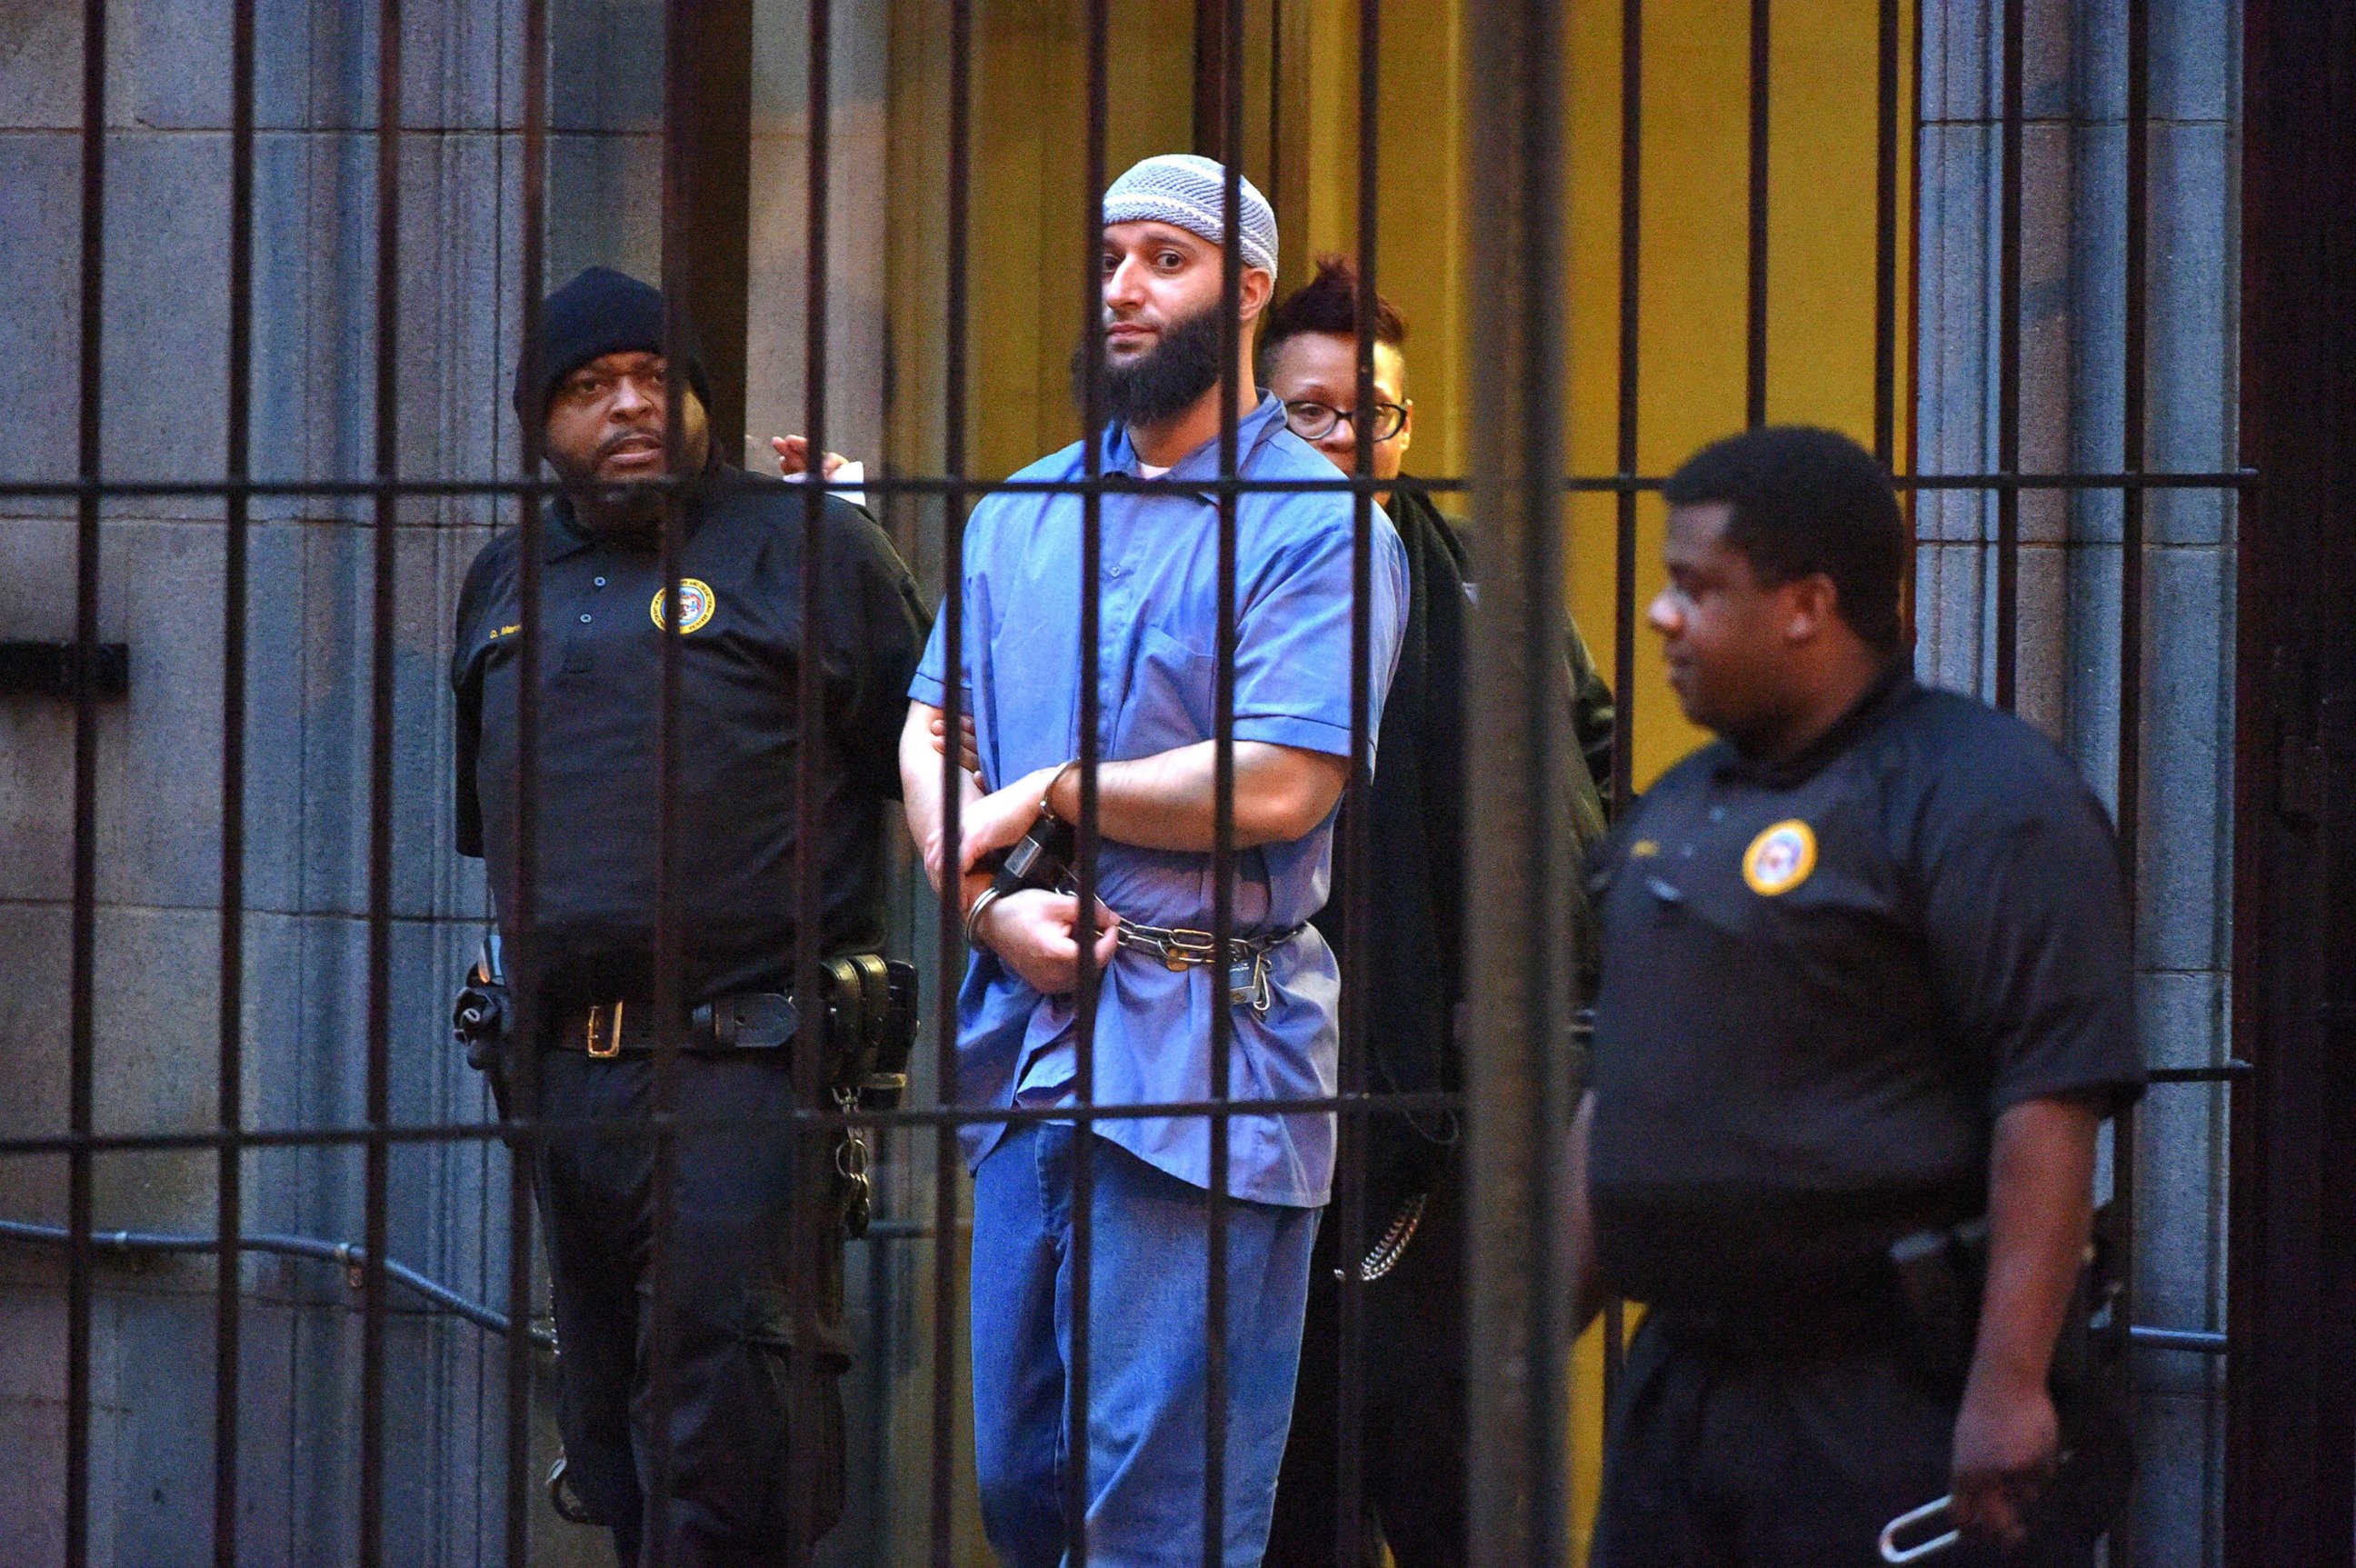 PHOTO:Officials escort "Serial" podcast subject Adnan Syed from the courthouse following the completion of the first day of hearings for a retrial in Baltimore,  Feb. 3, 2016.  